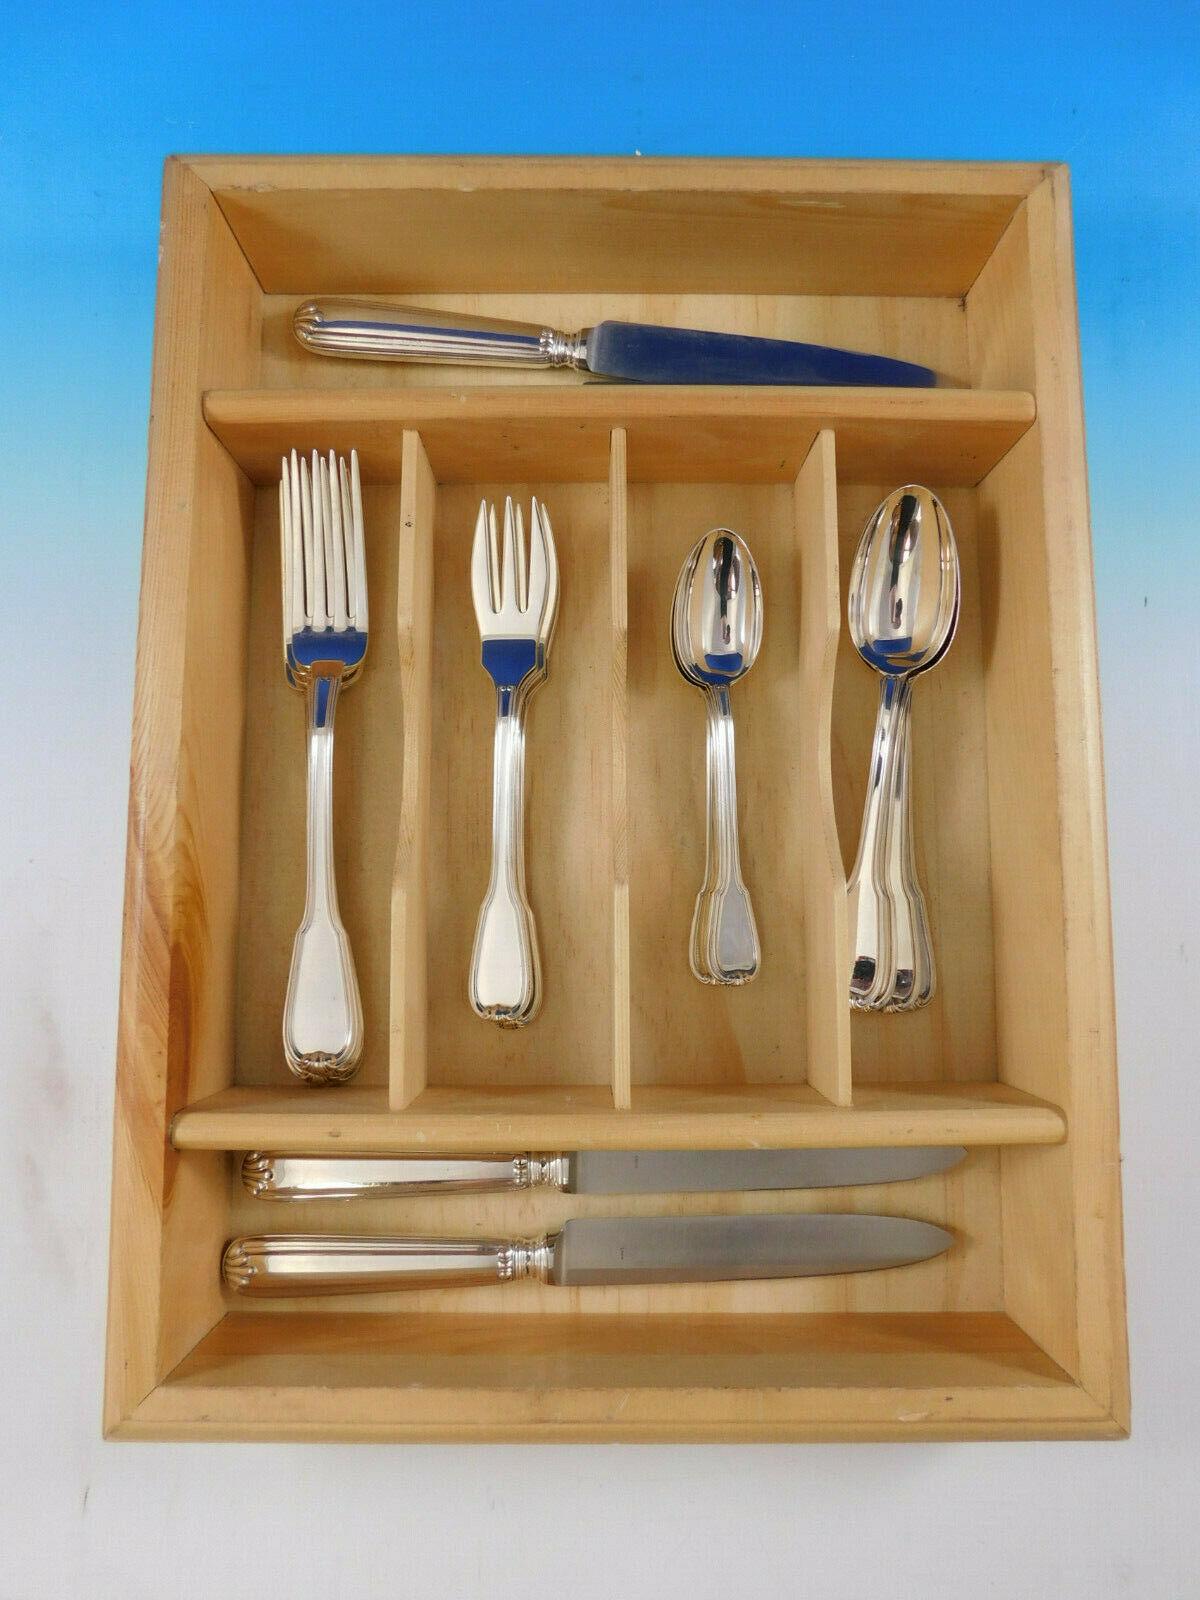 Rare dinner size Lucrezia by Buccellati Italy sterling silver flatware set - 20 pieces. Great starter set! This service is heavy and well balanced and includes:

4 dinner knives, 9 3/4